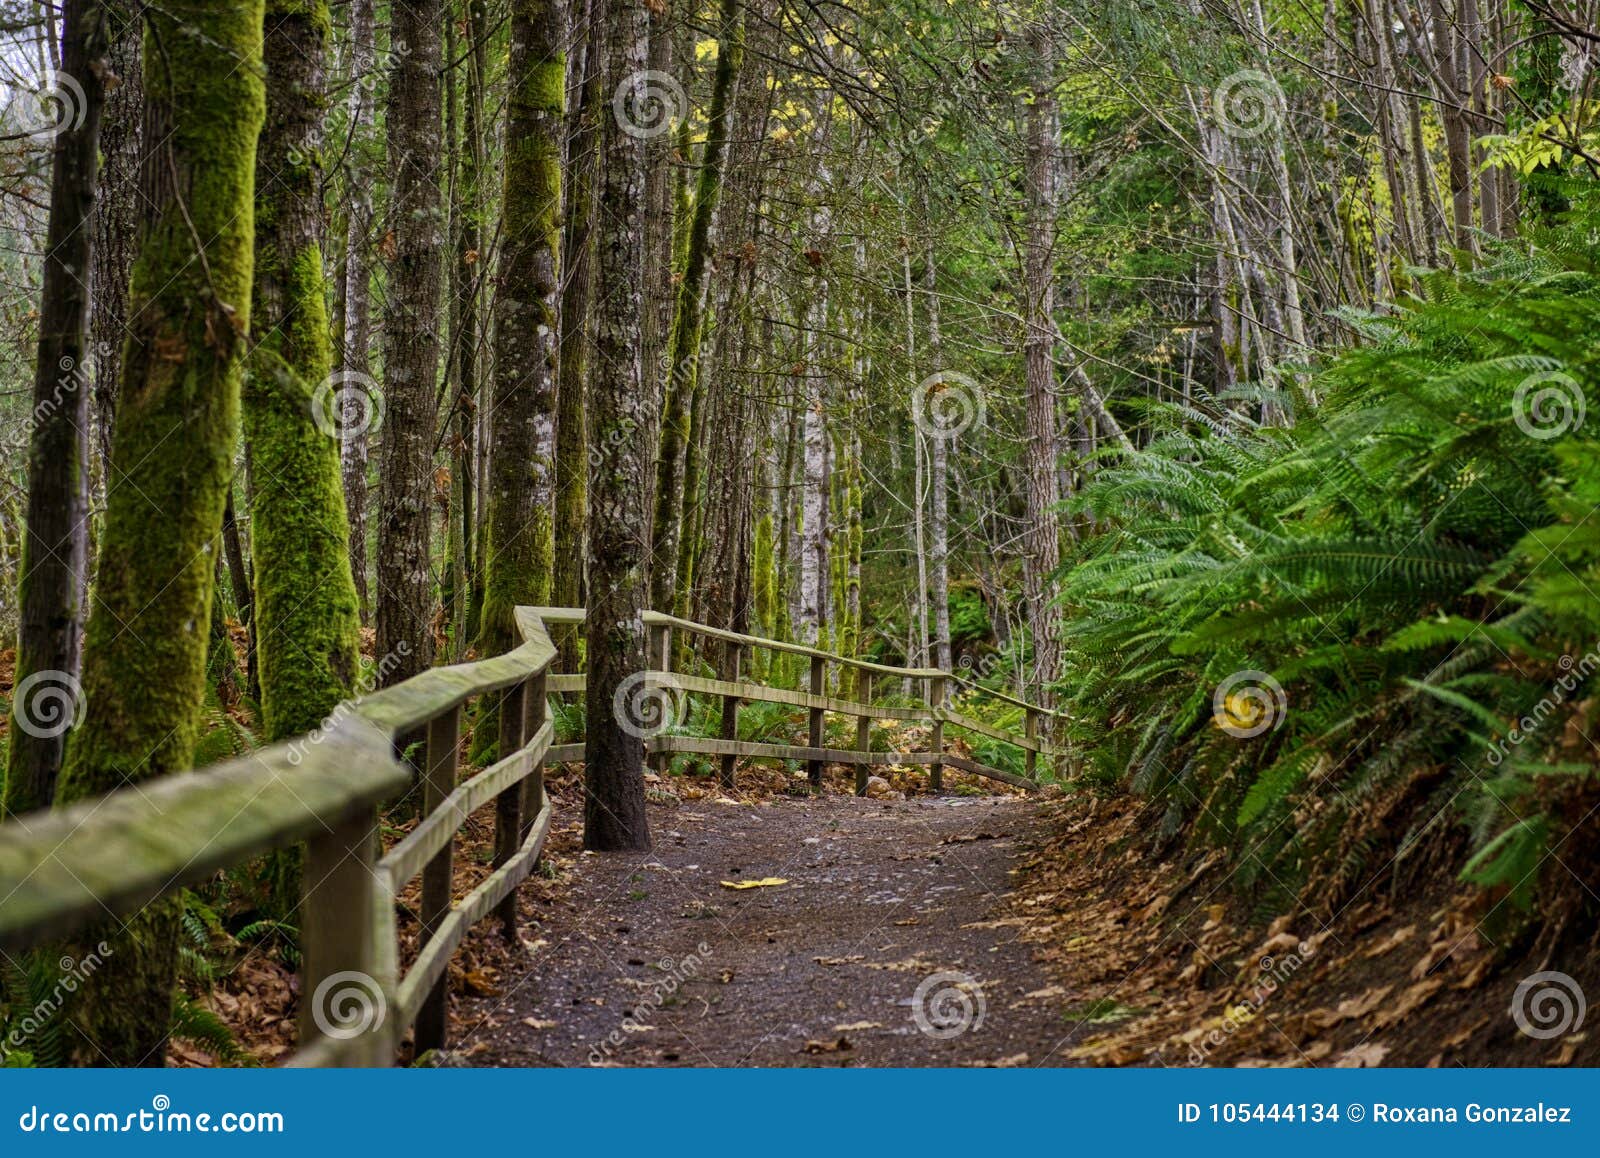 old growth rain forest in holland creek trail in ladysmith, vancouver island, canada